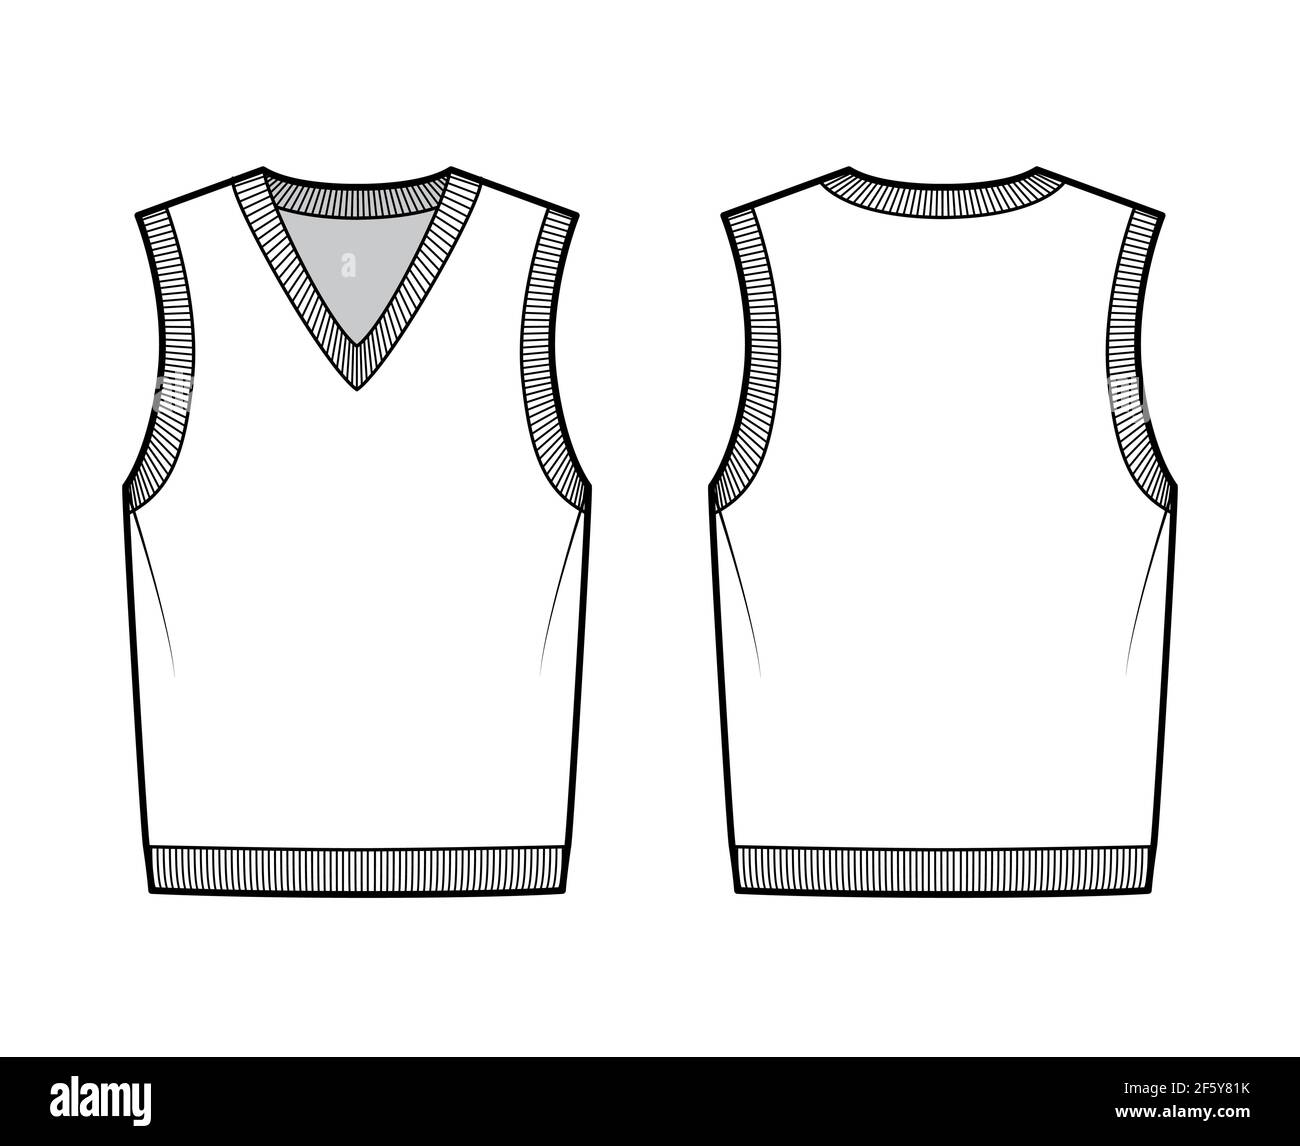 Pullover vest sweater waistcoat technical fashion illustration with sleeveless, rib knit V-neckline, oversized body. Flat template front, back, white color style. Women, men, unisex top CAD mockup Stock Vector